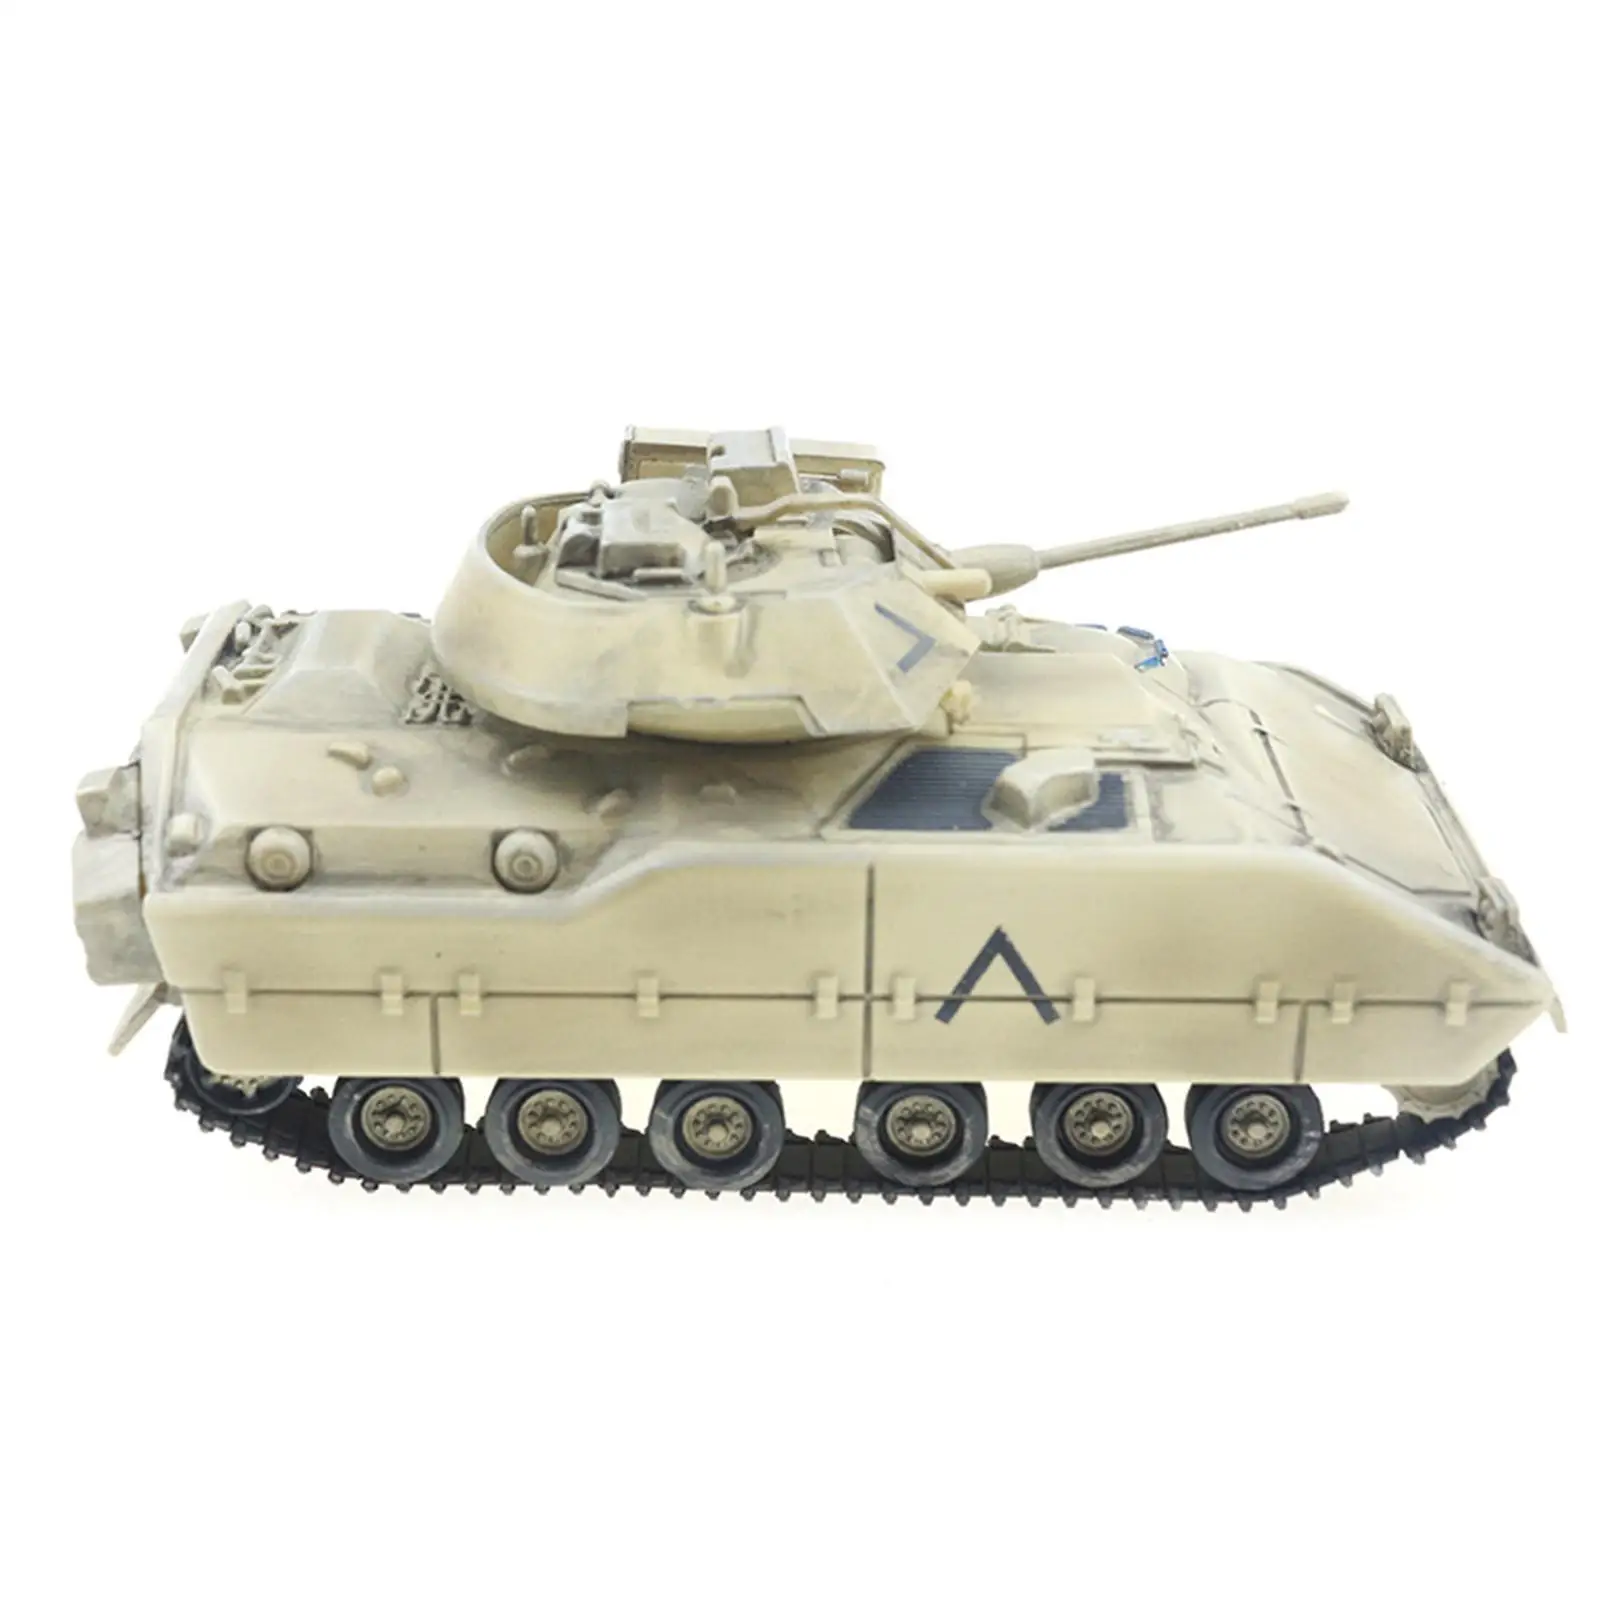 1/72 Scale Metal M2 IFV Diecast Tank Model Collecti Gifts Toys Decorati